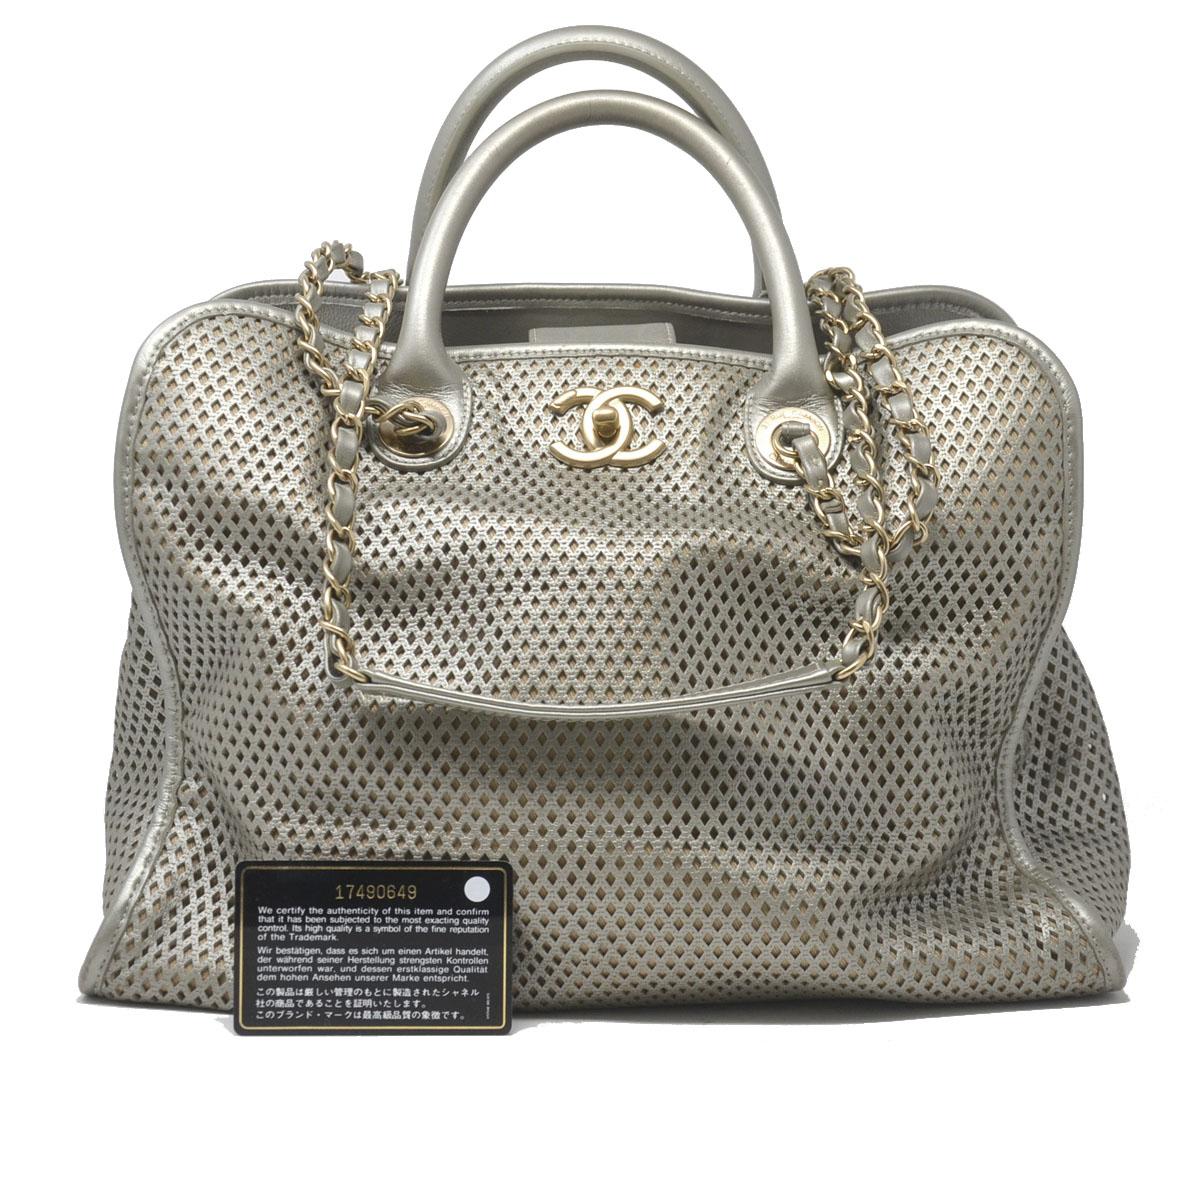 Chanel Gray Metallic GHW Perforated Leather Tote Handbag With Card 2